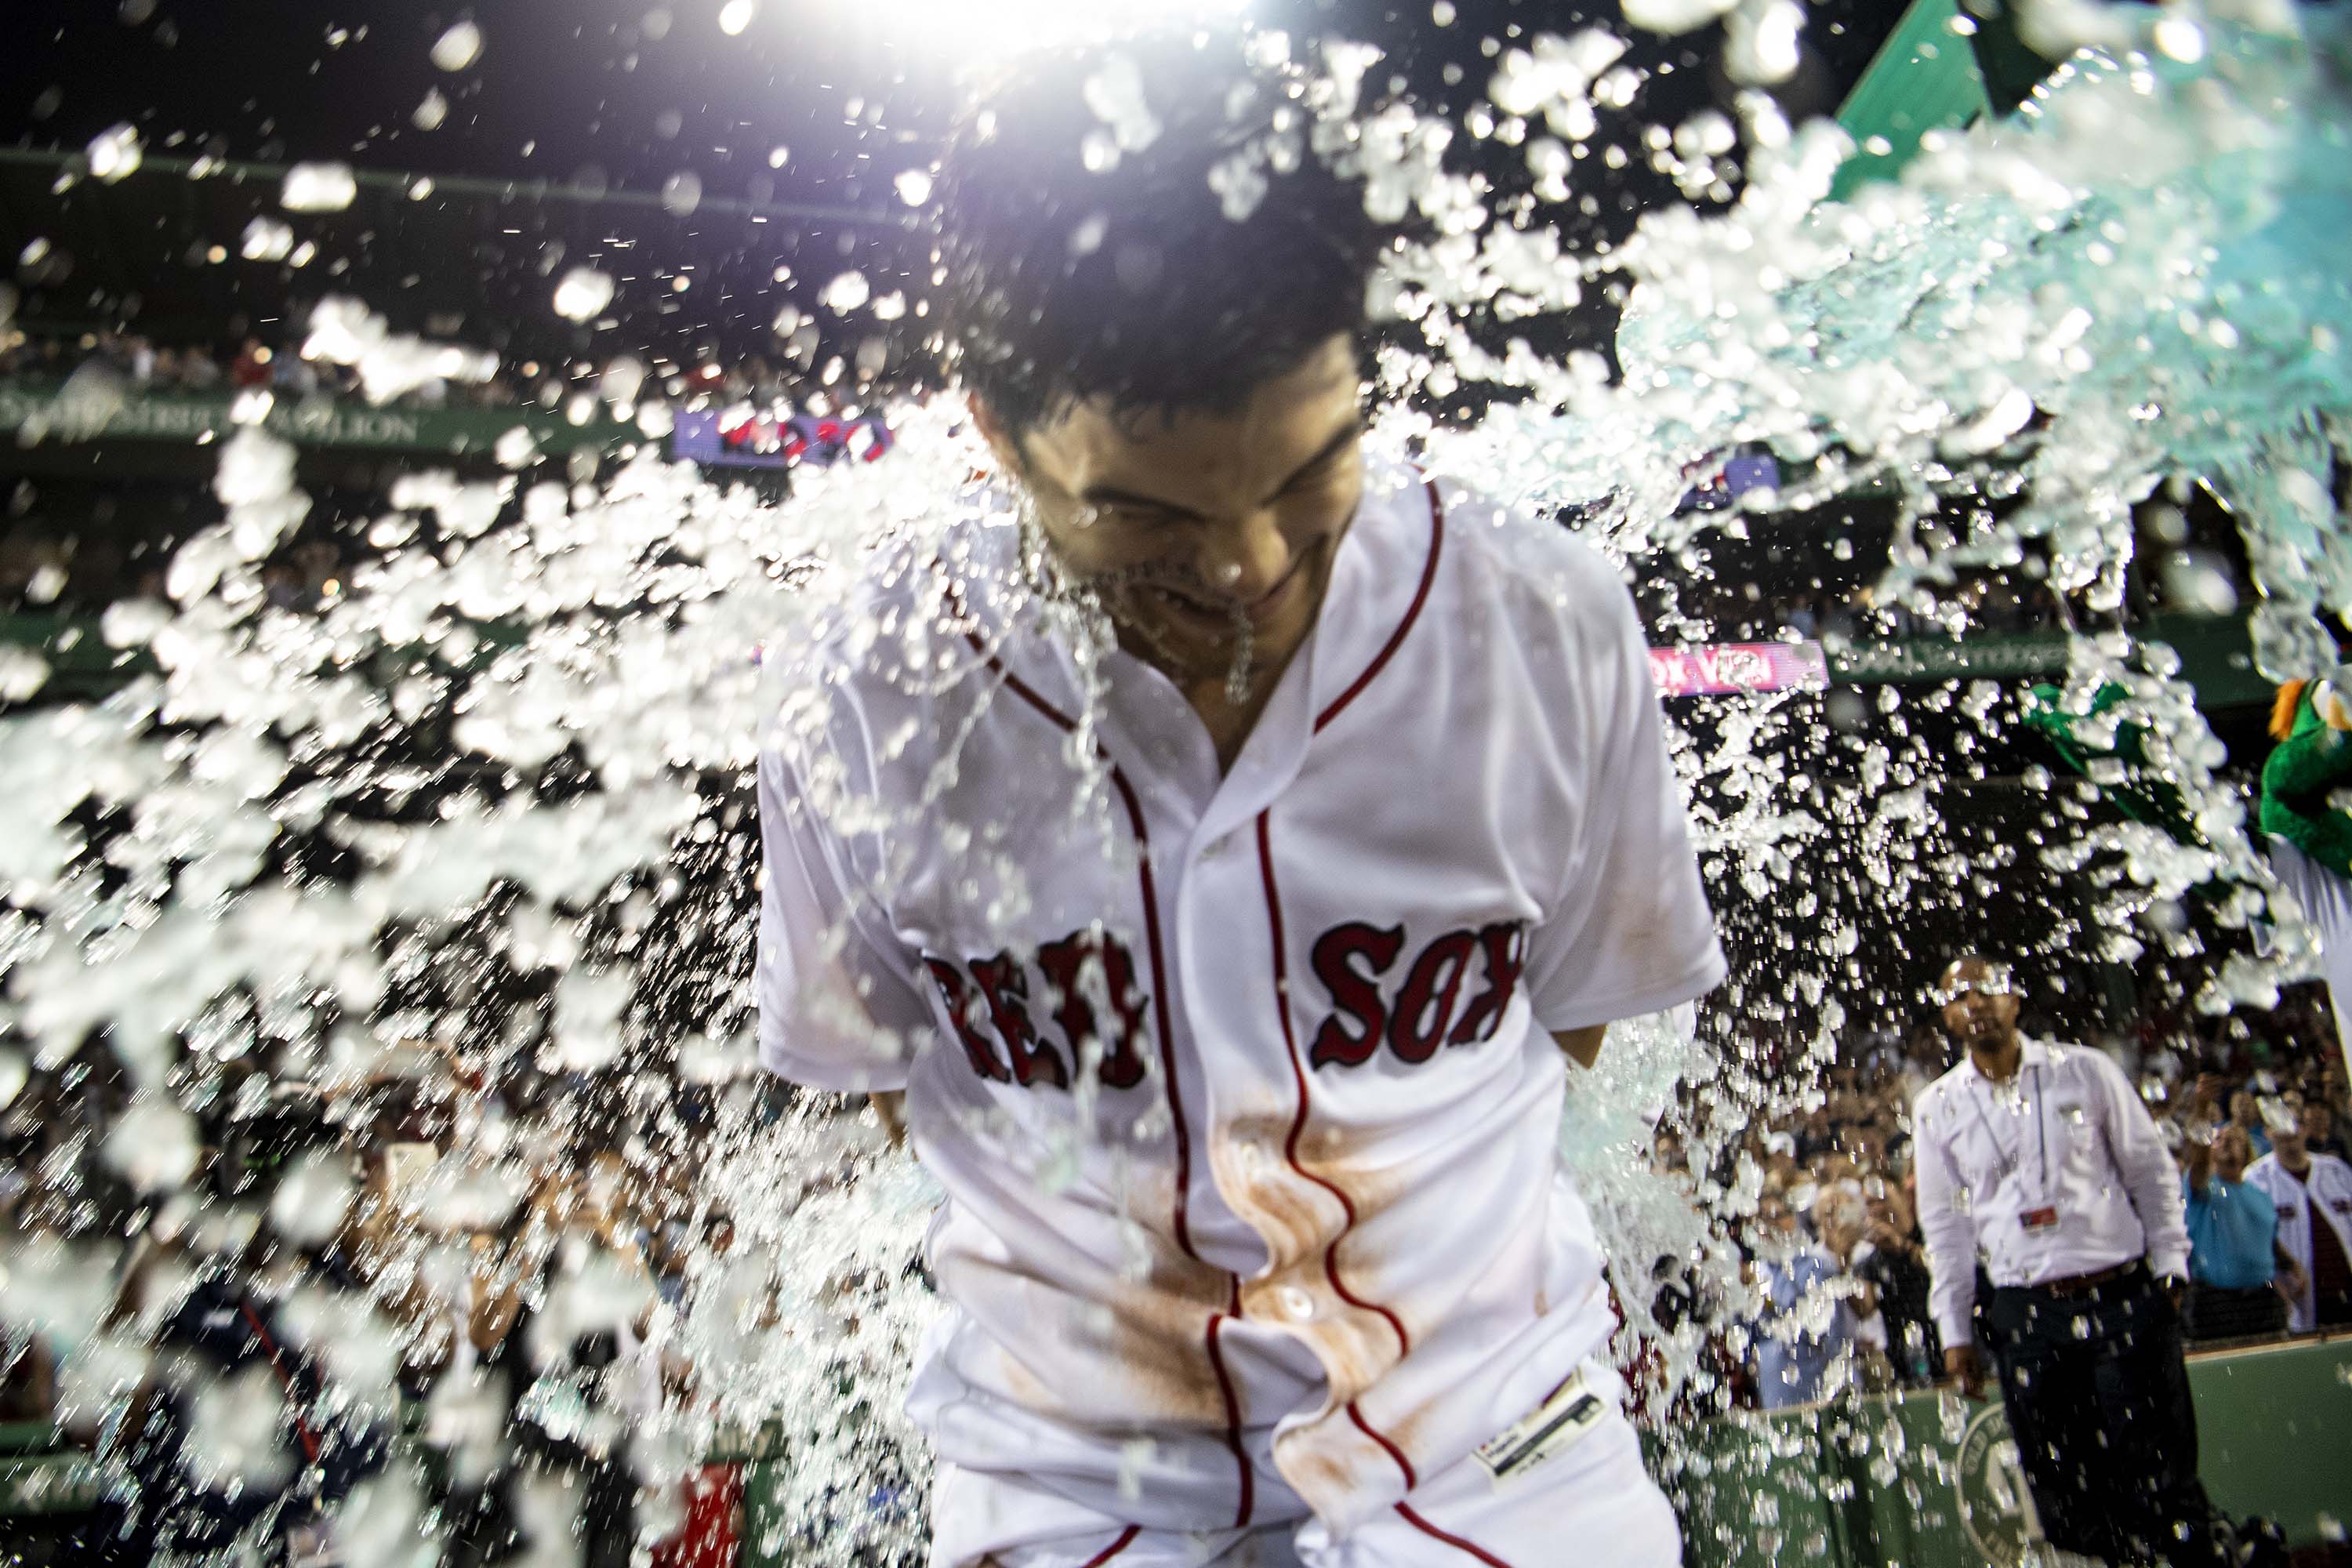 Andrew Benintendi's ascent to Boston Red Sox stardom began when he